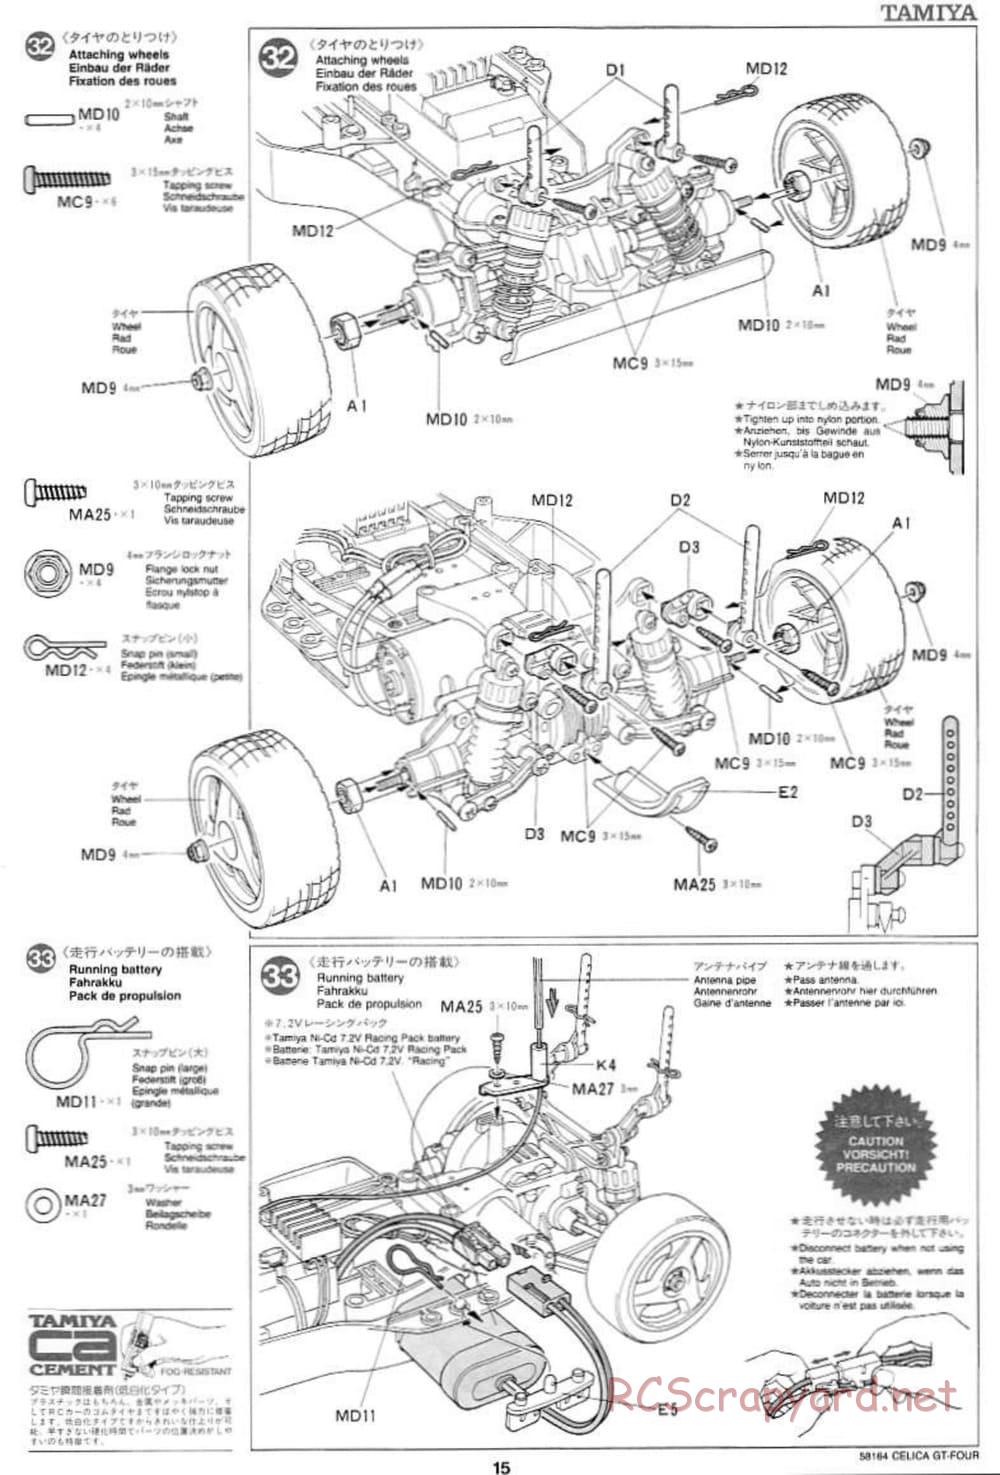 Tamiya - Toyota Celica GT Four - TA-02 Chassis - Manual - Page 15